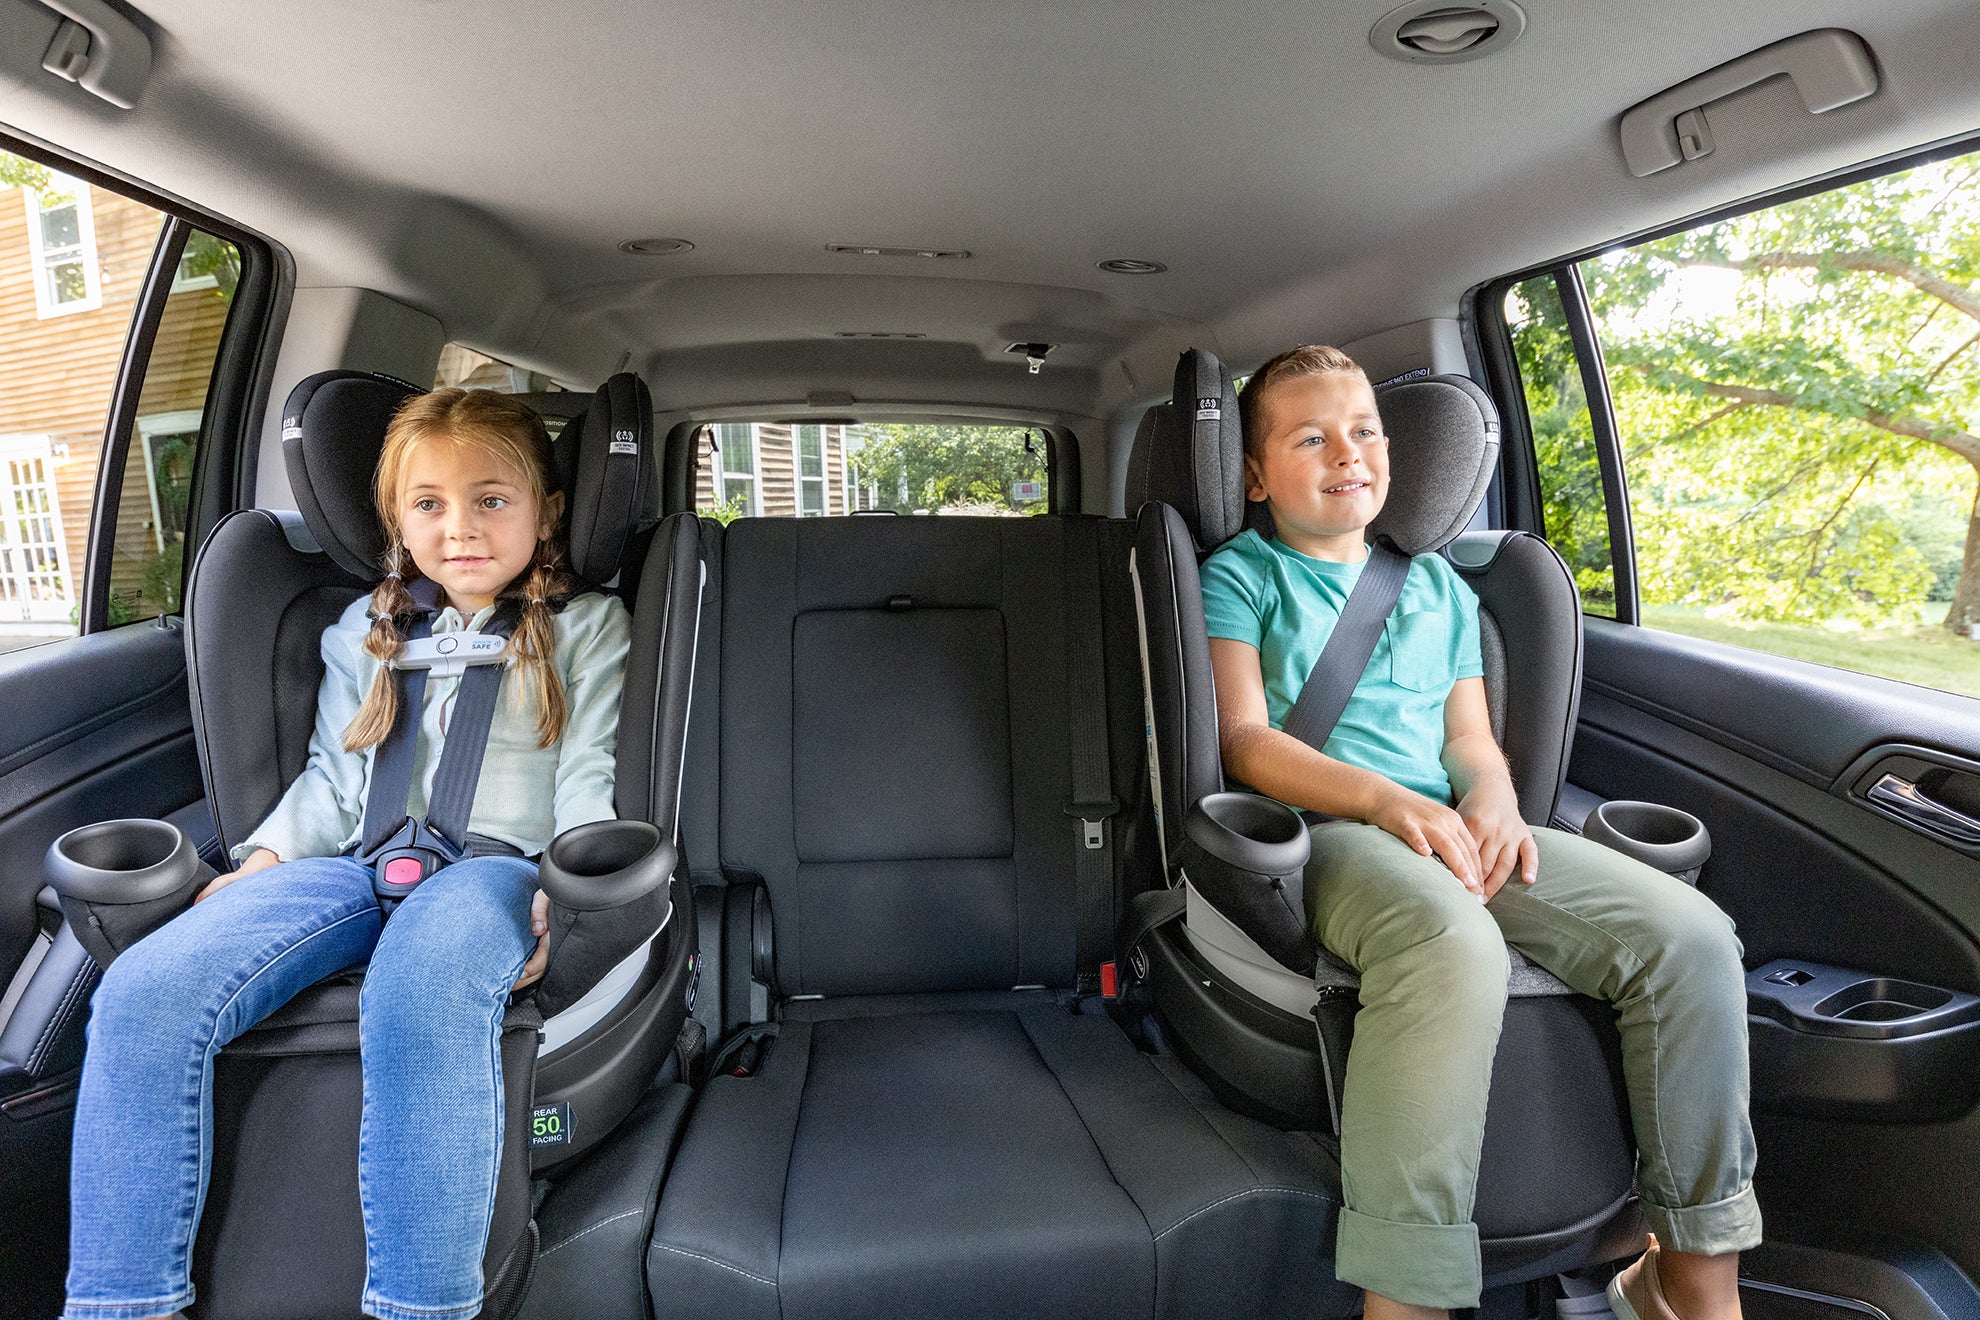 Car Seats for Children and Adults with Disabilities - BLOG